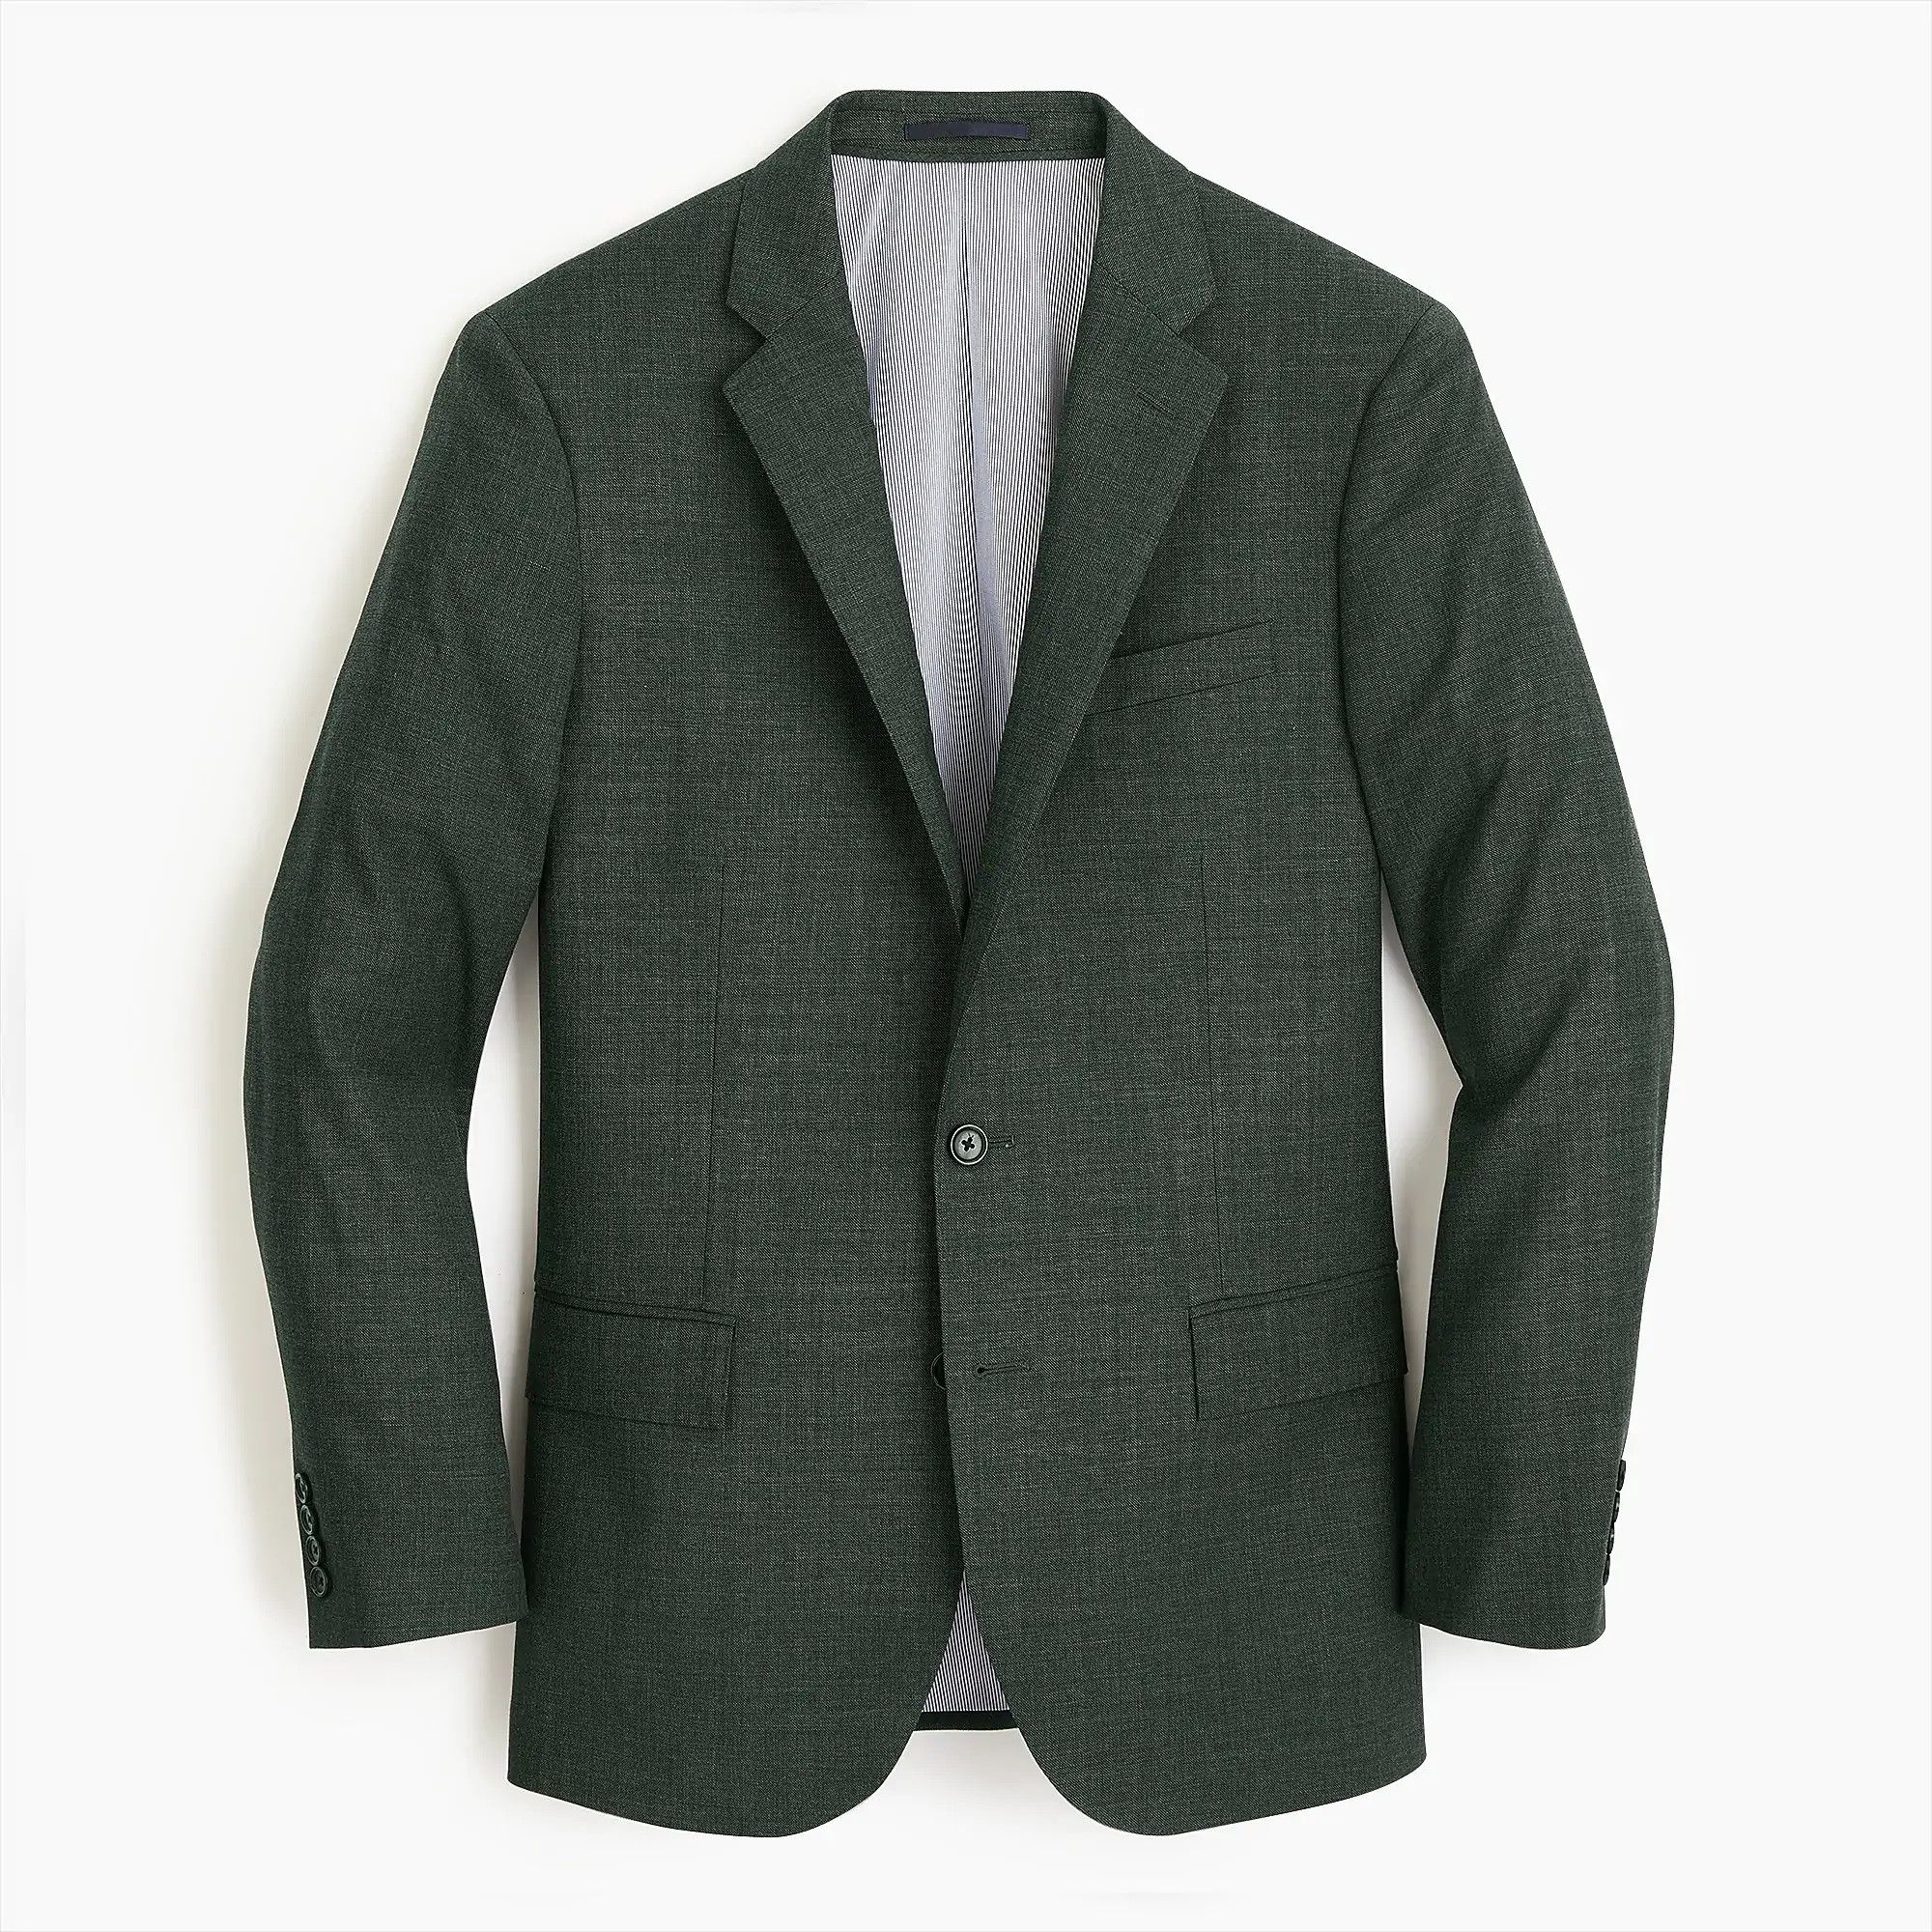 J.Crew: Ludlow Slim-fit Suit Jacket In Italian Stretch Worsted Wool For Men